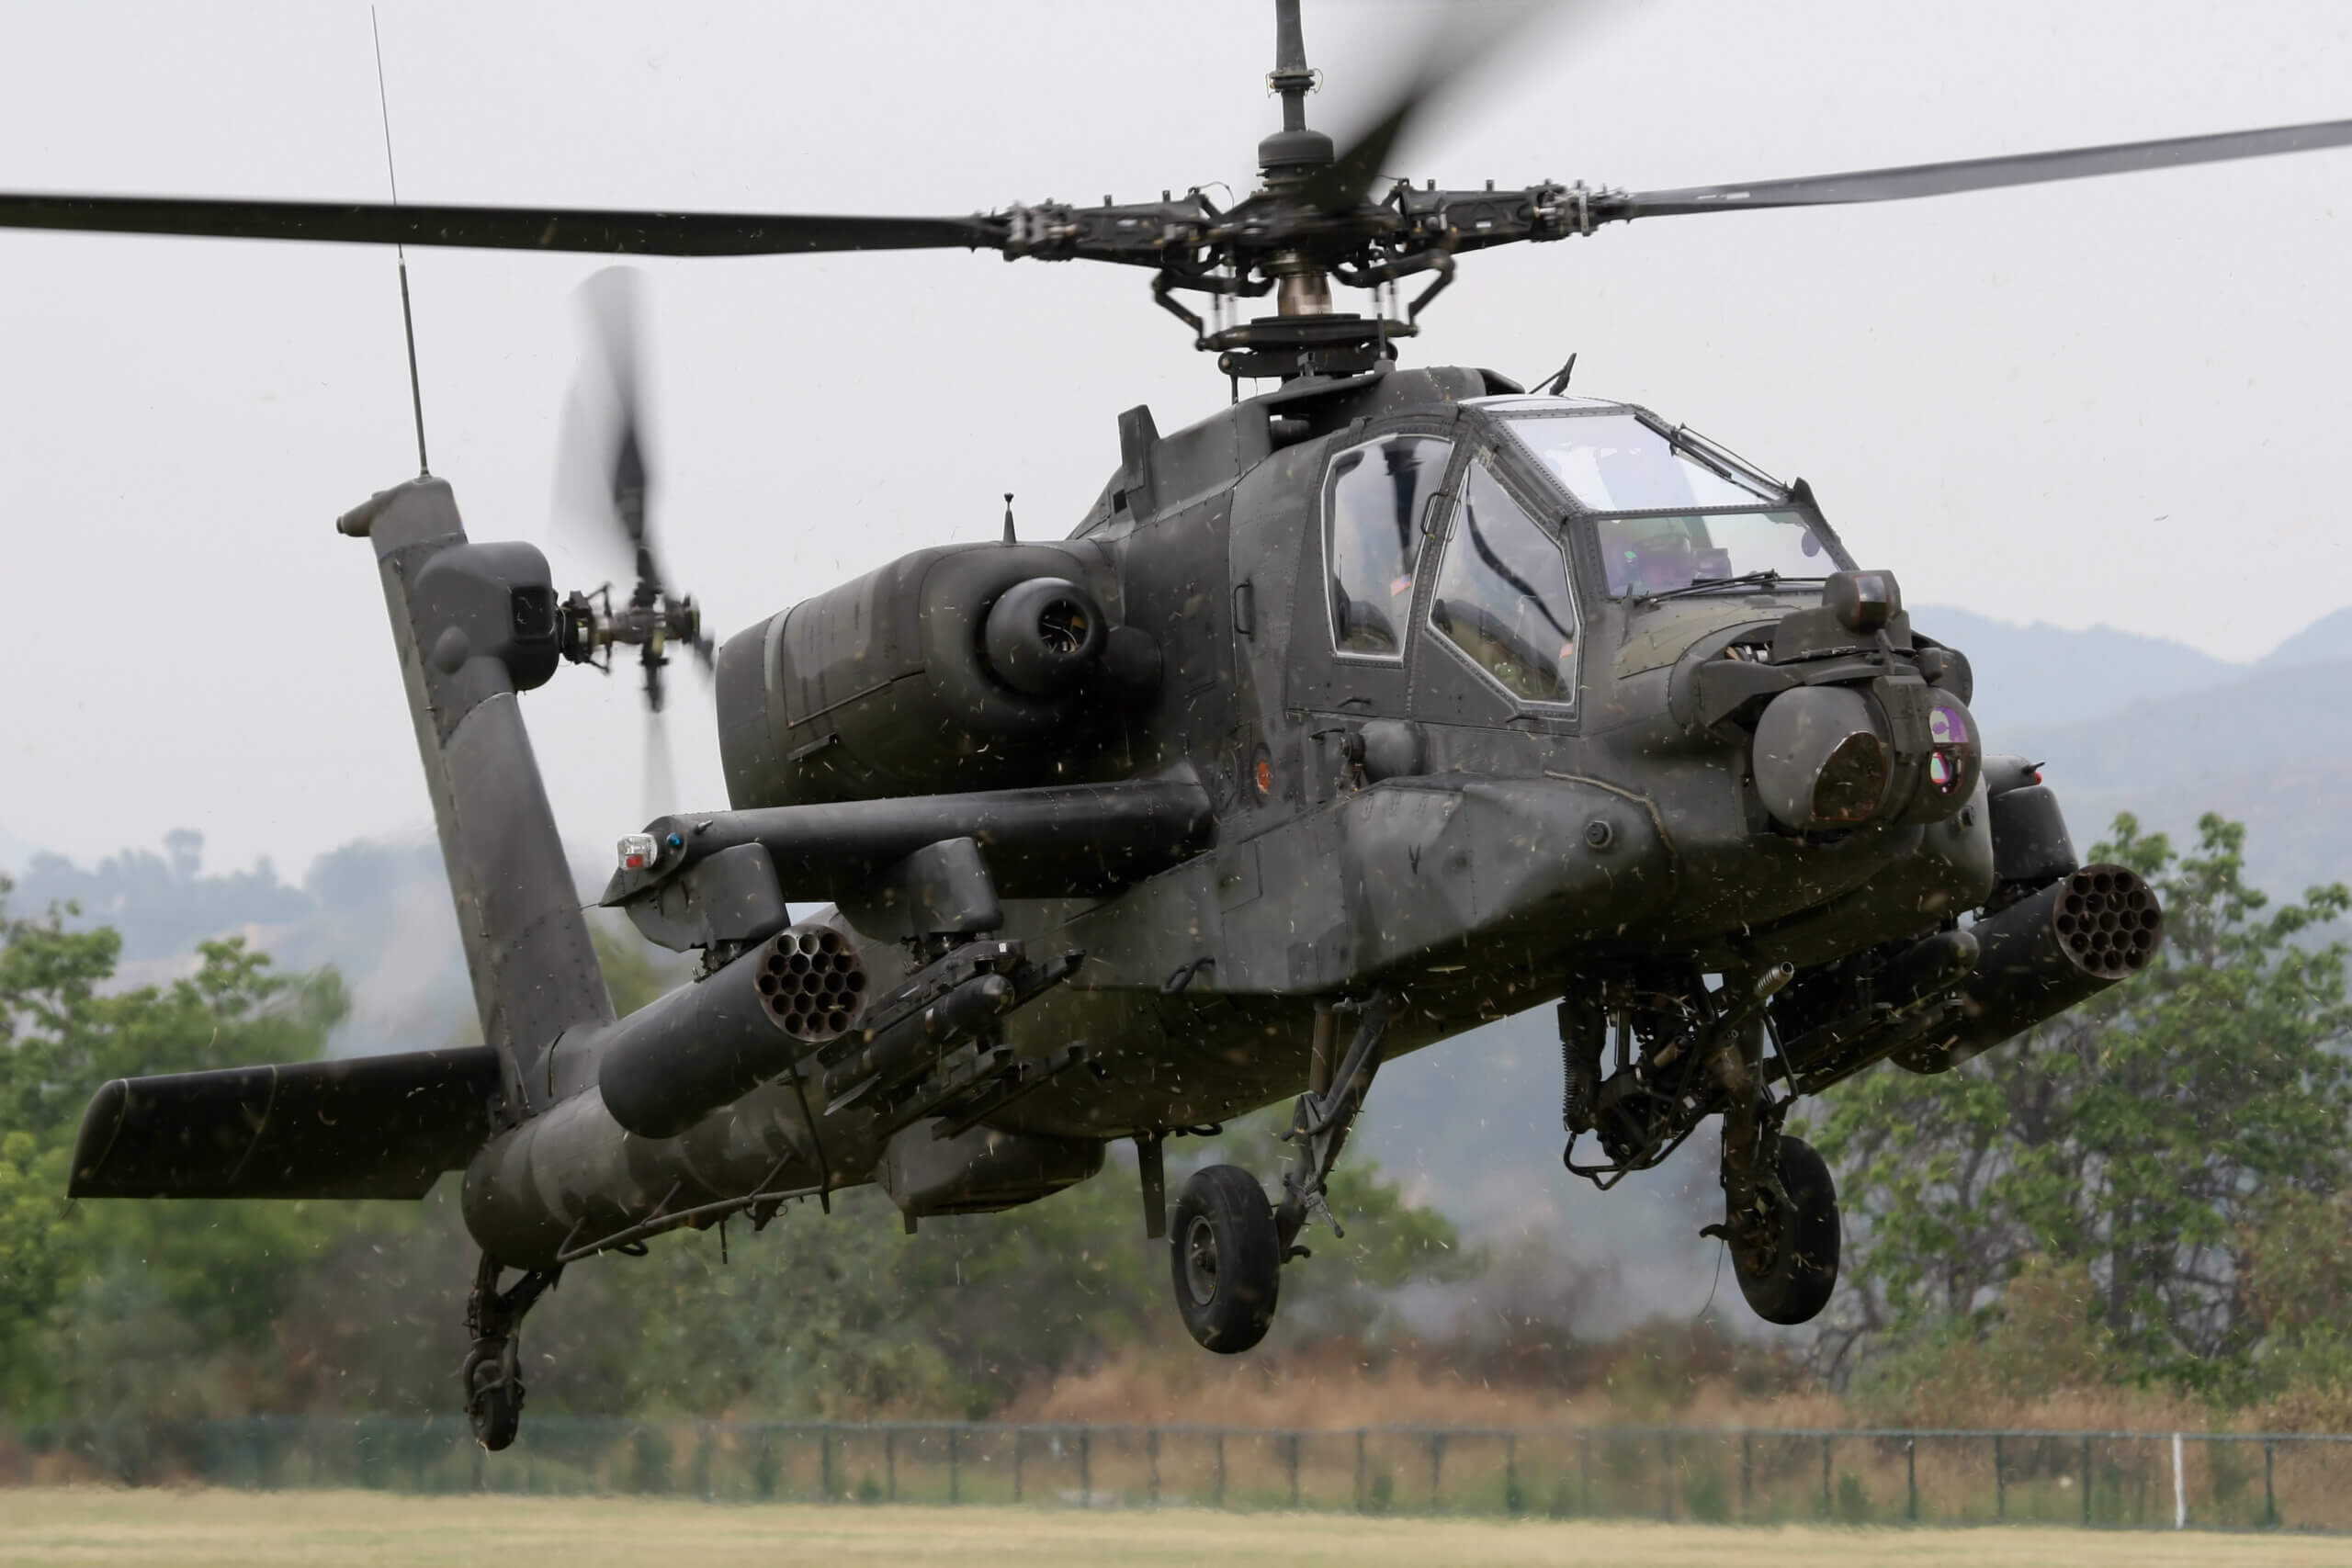 Iraq War Helicopters - Boeing AH-64 Apache